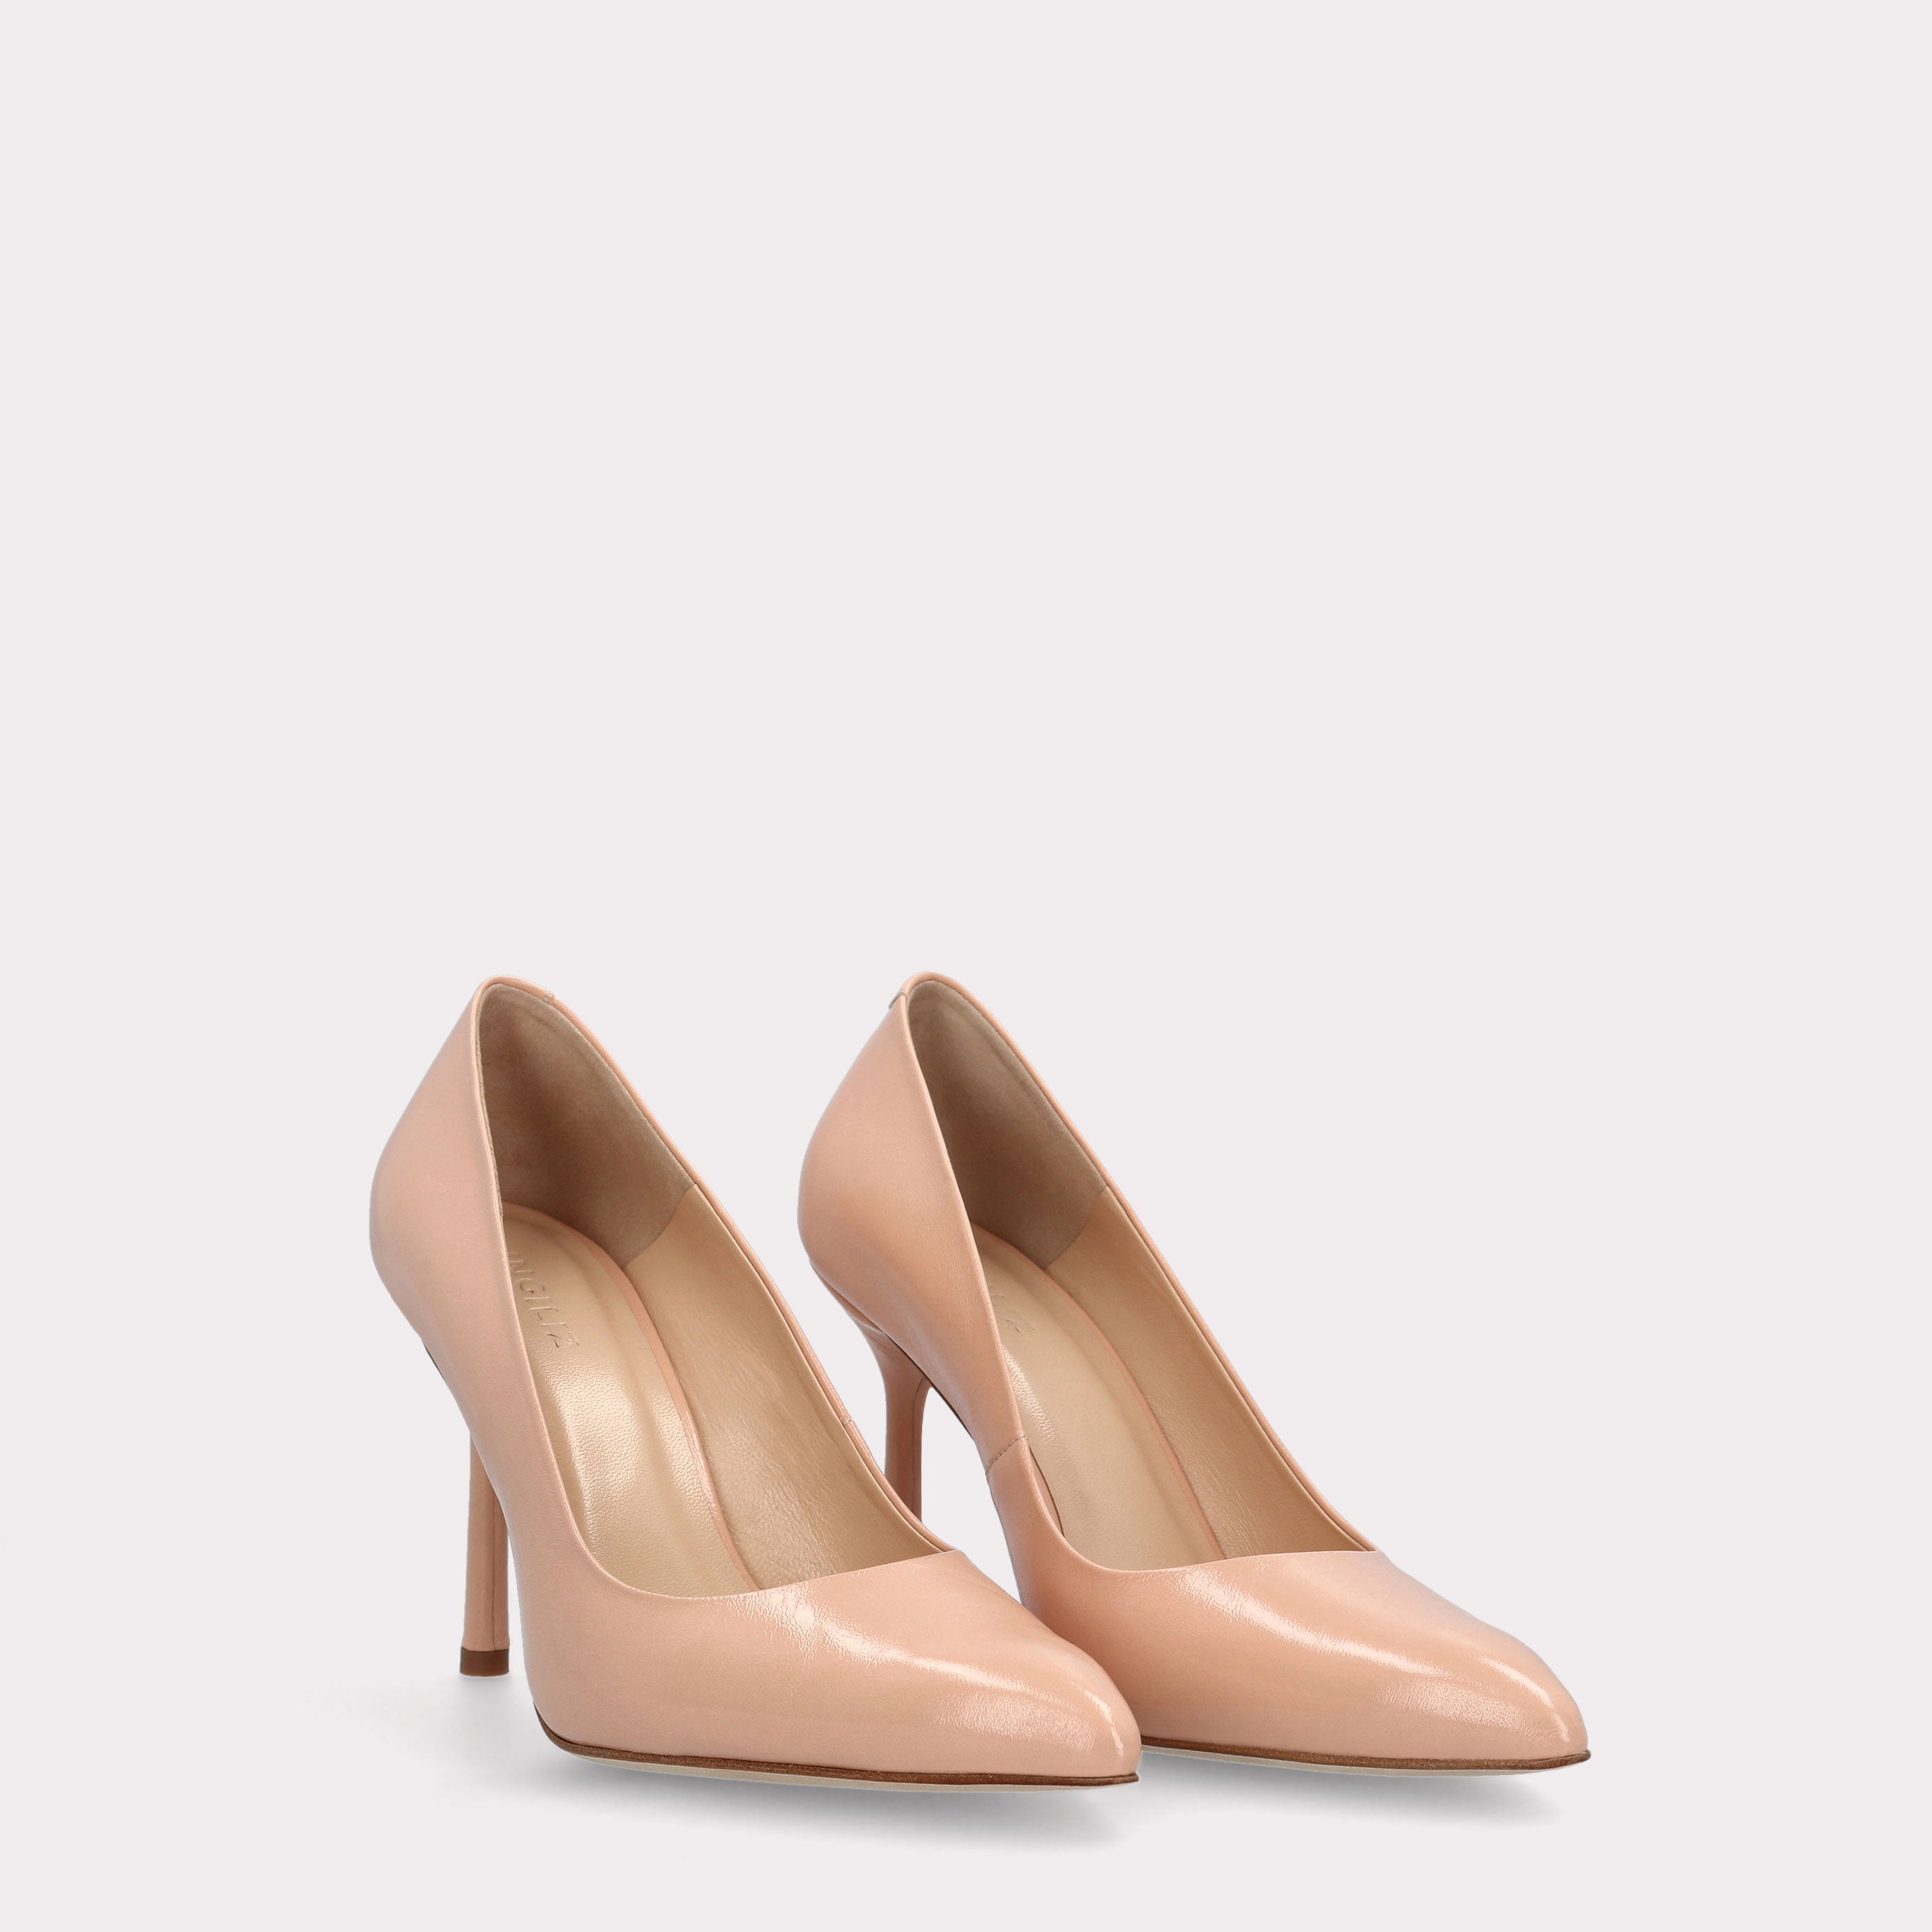 ABA 05 NUDE LEATHER PUMPS